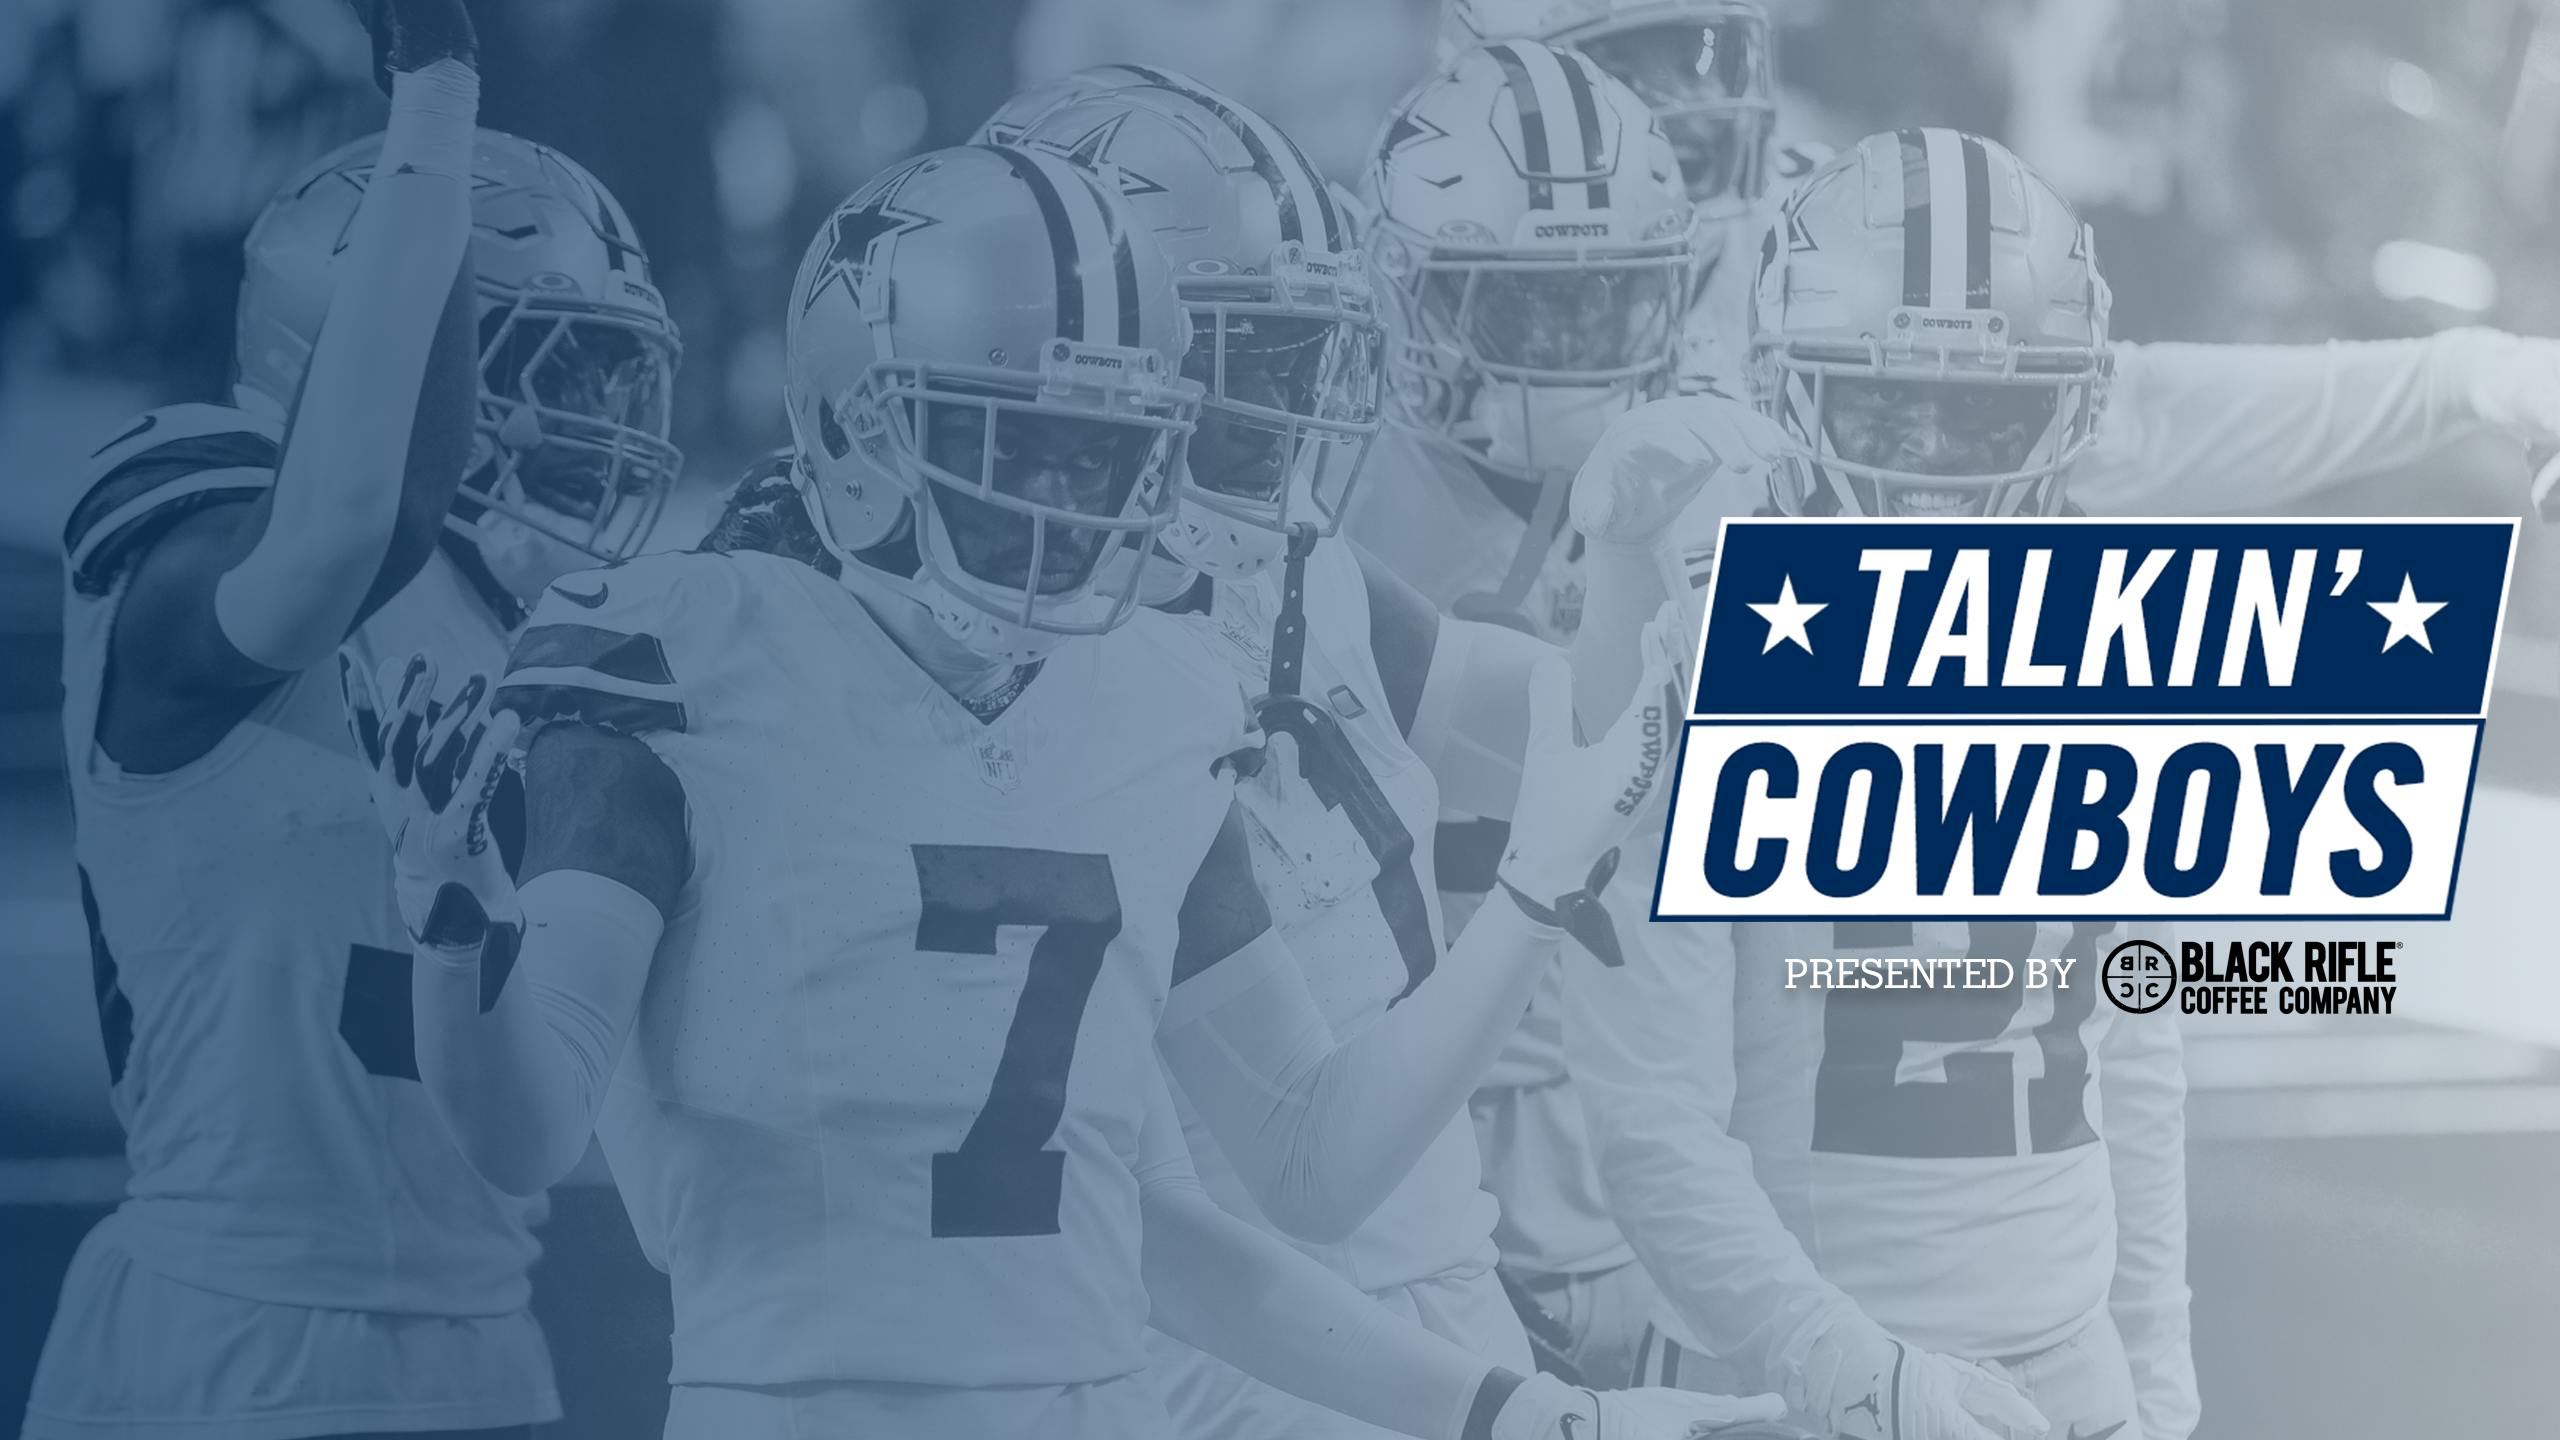 Talkin’ Cowboys: Reloaded and Refreshed